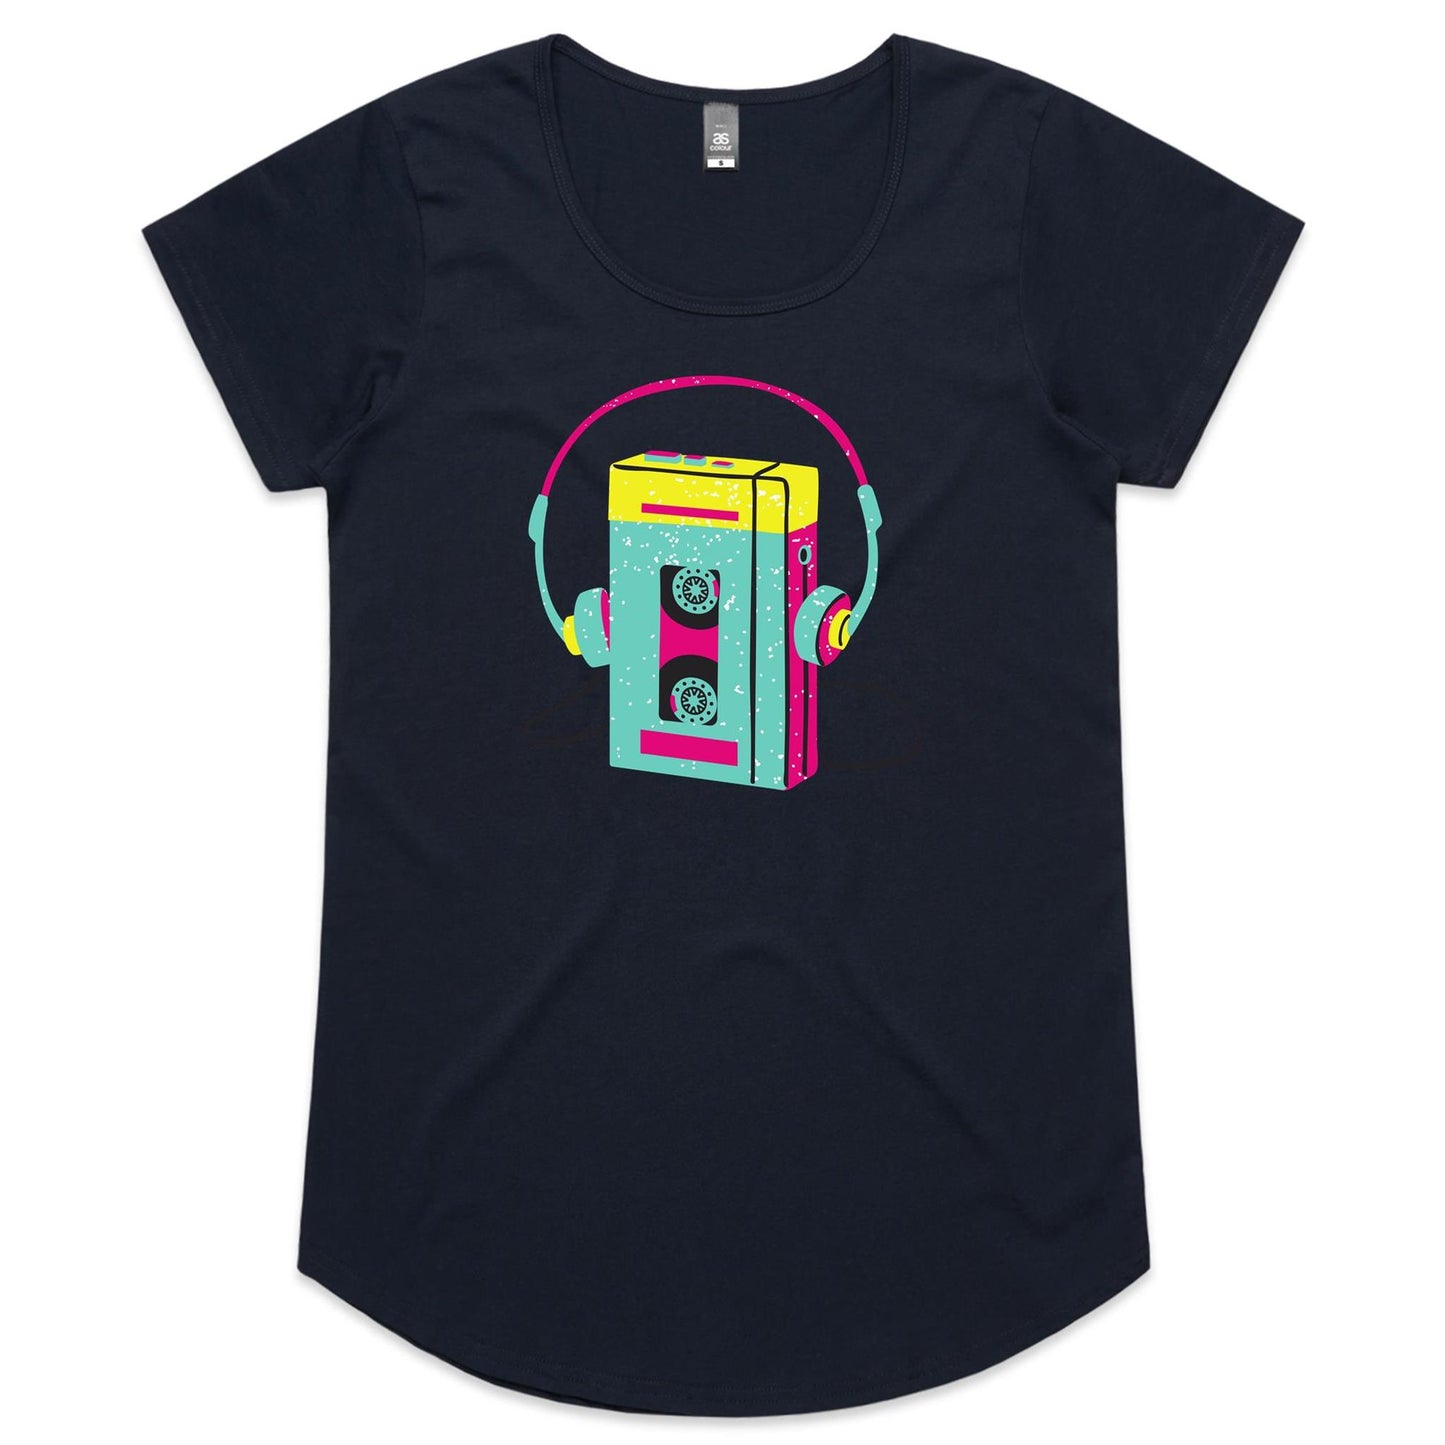 Wired For Sound - Womens Scoop Neck T-Shirt Navy Womens Scoop Neck T-shirt Music Retro Womens